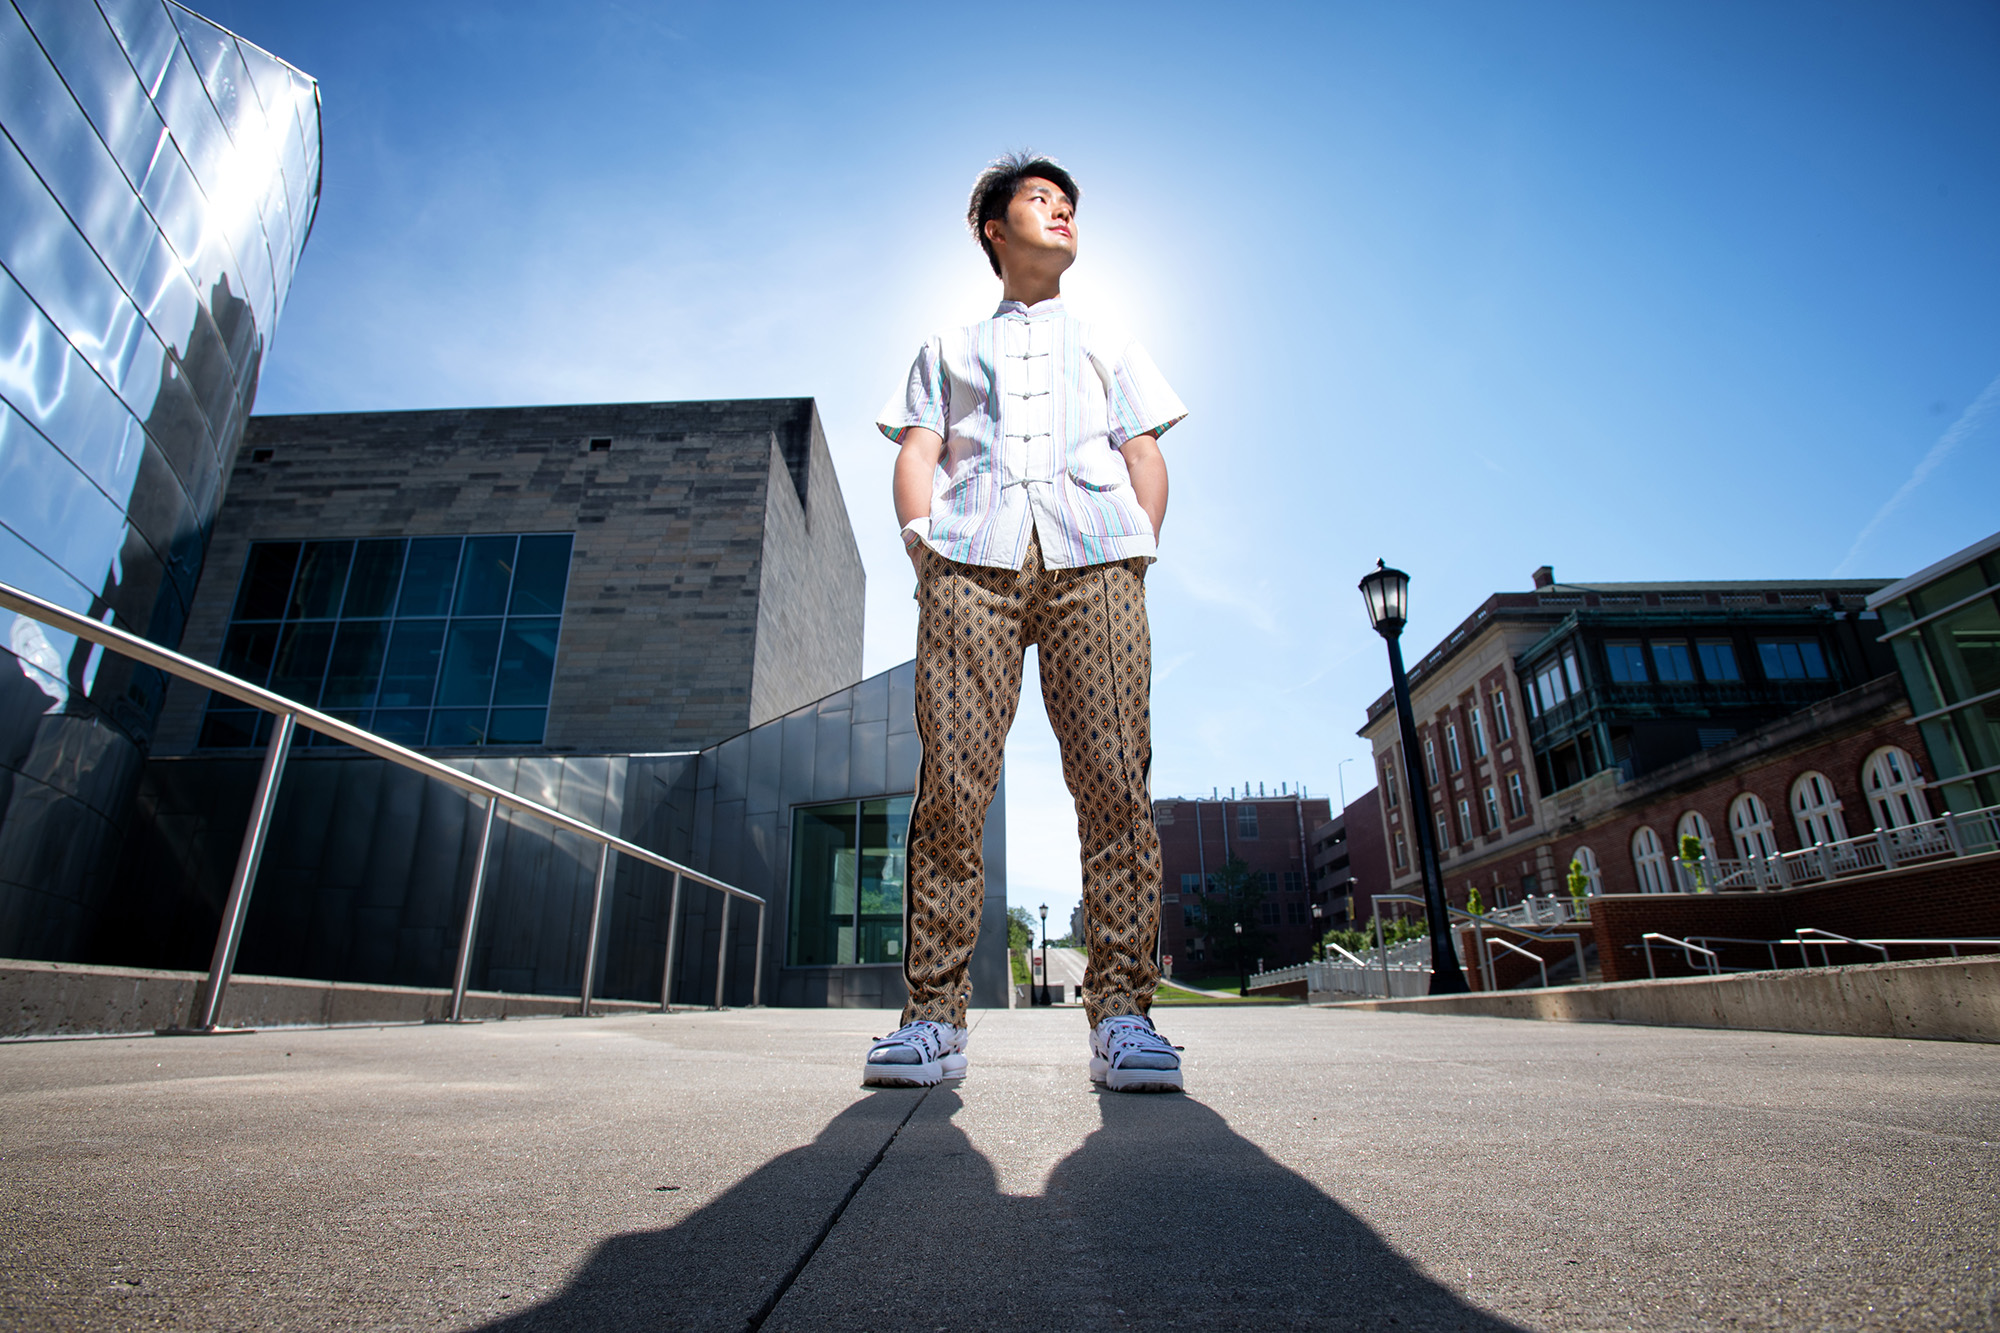 University of Iowa Master of Fine Arts student Hao Zhou standing on campus on a sunny day, looking to his left